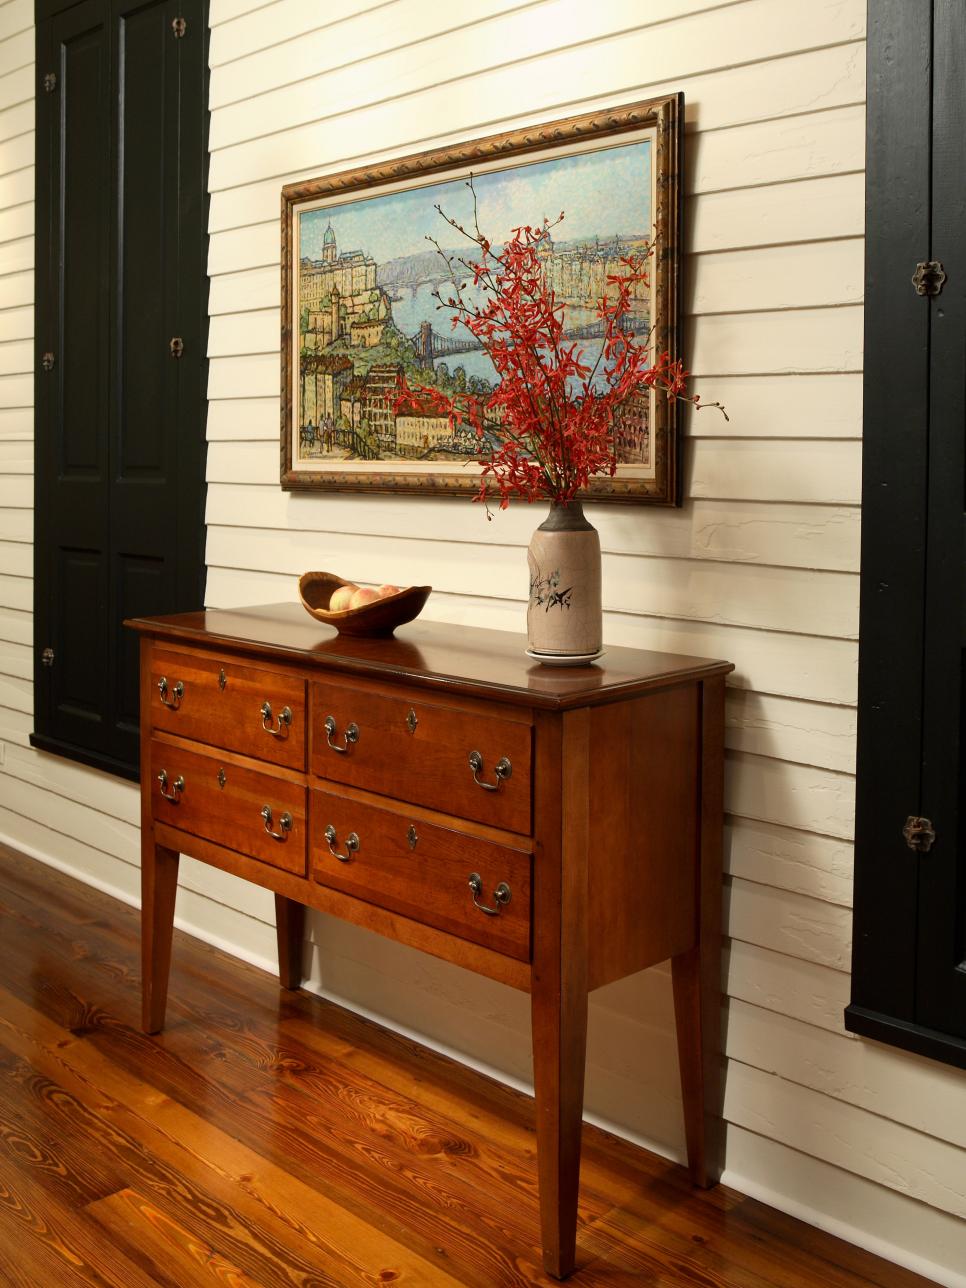 Entry Space With White Wood Siding, Black Shutters and Wood Credenza